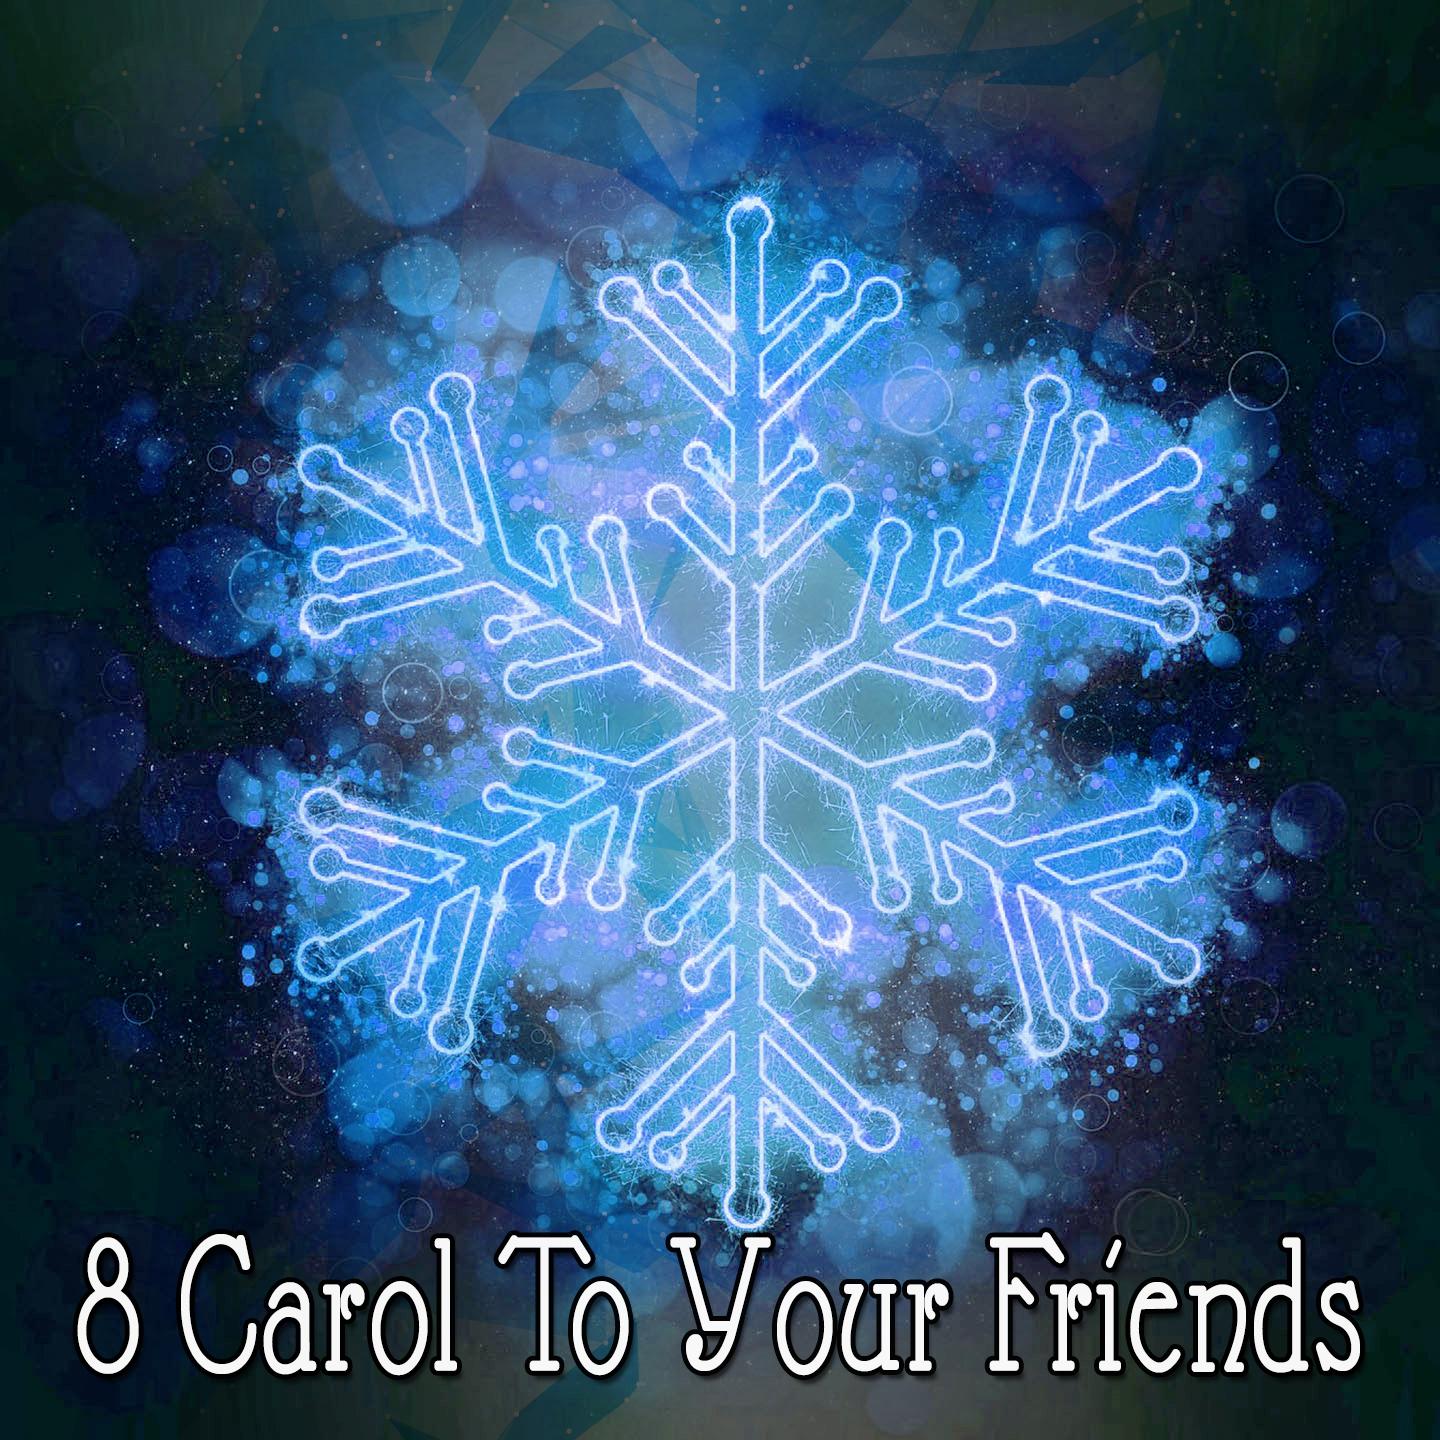 8 Carol To Your Friends